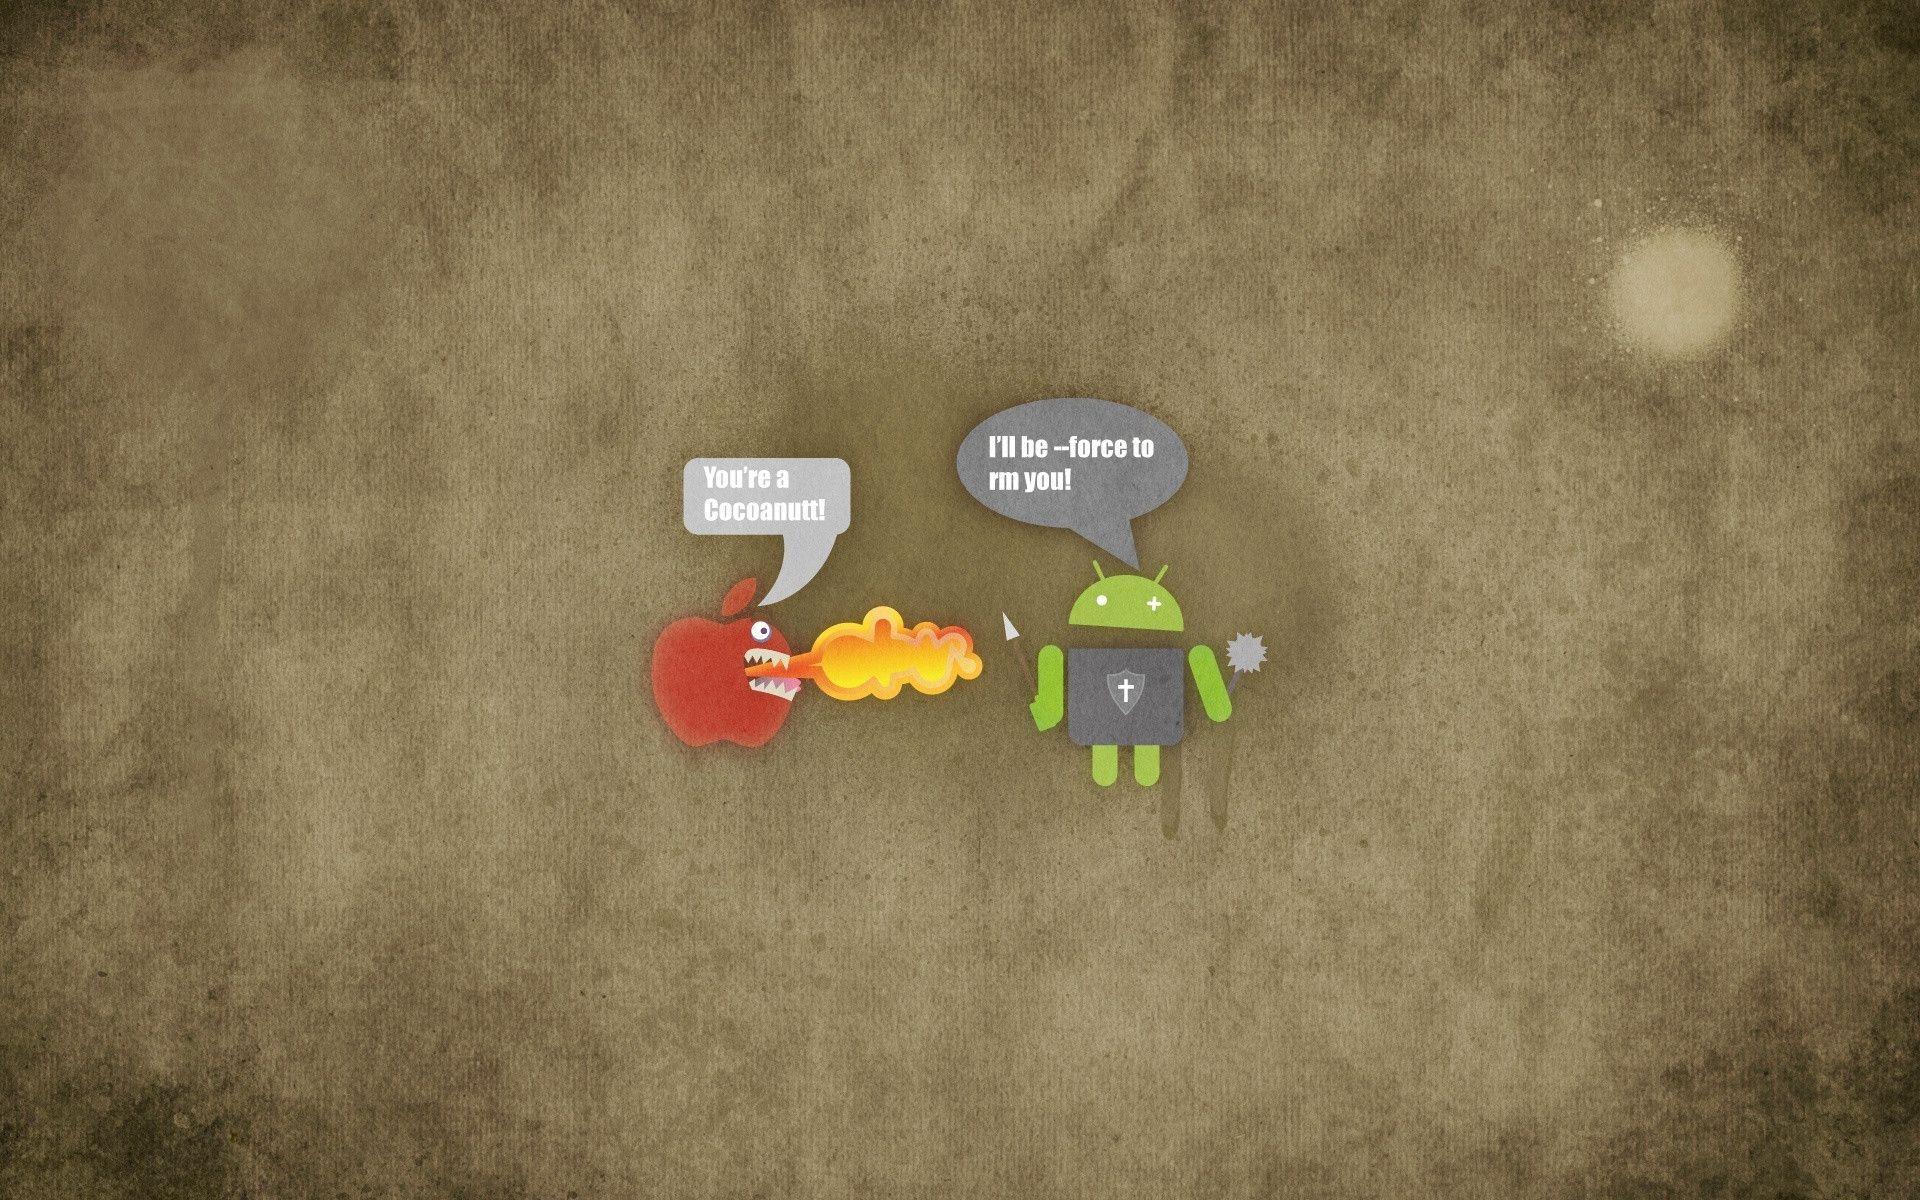 Android vs Apple Wallpaper for Android FansDzineblog360